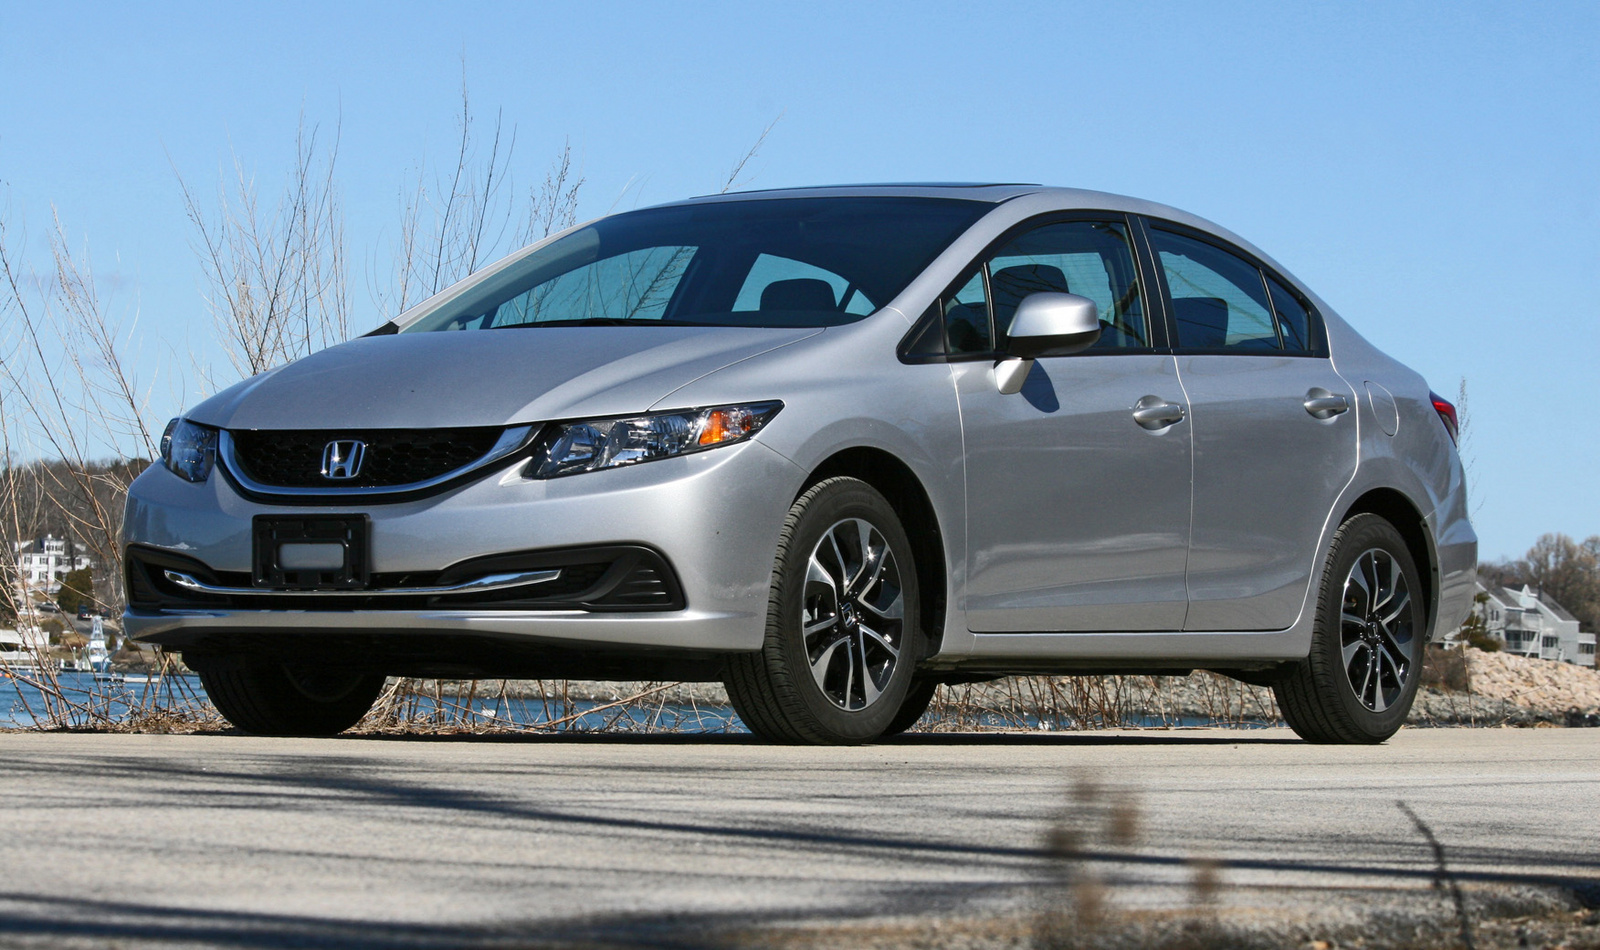 2013 Honda Civic Test Drive Review summaryImage